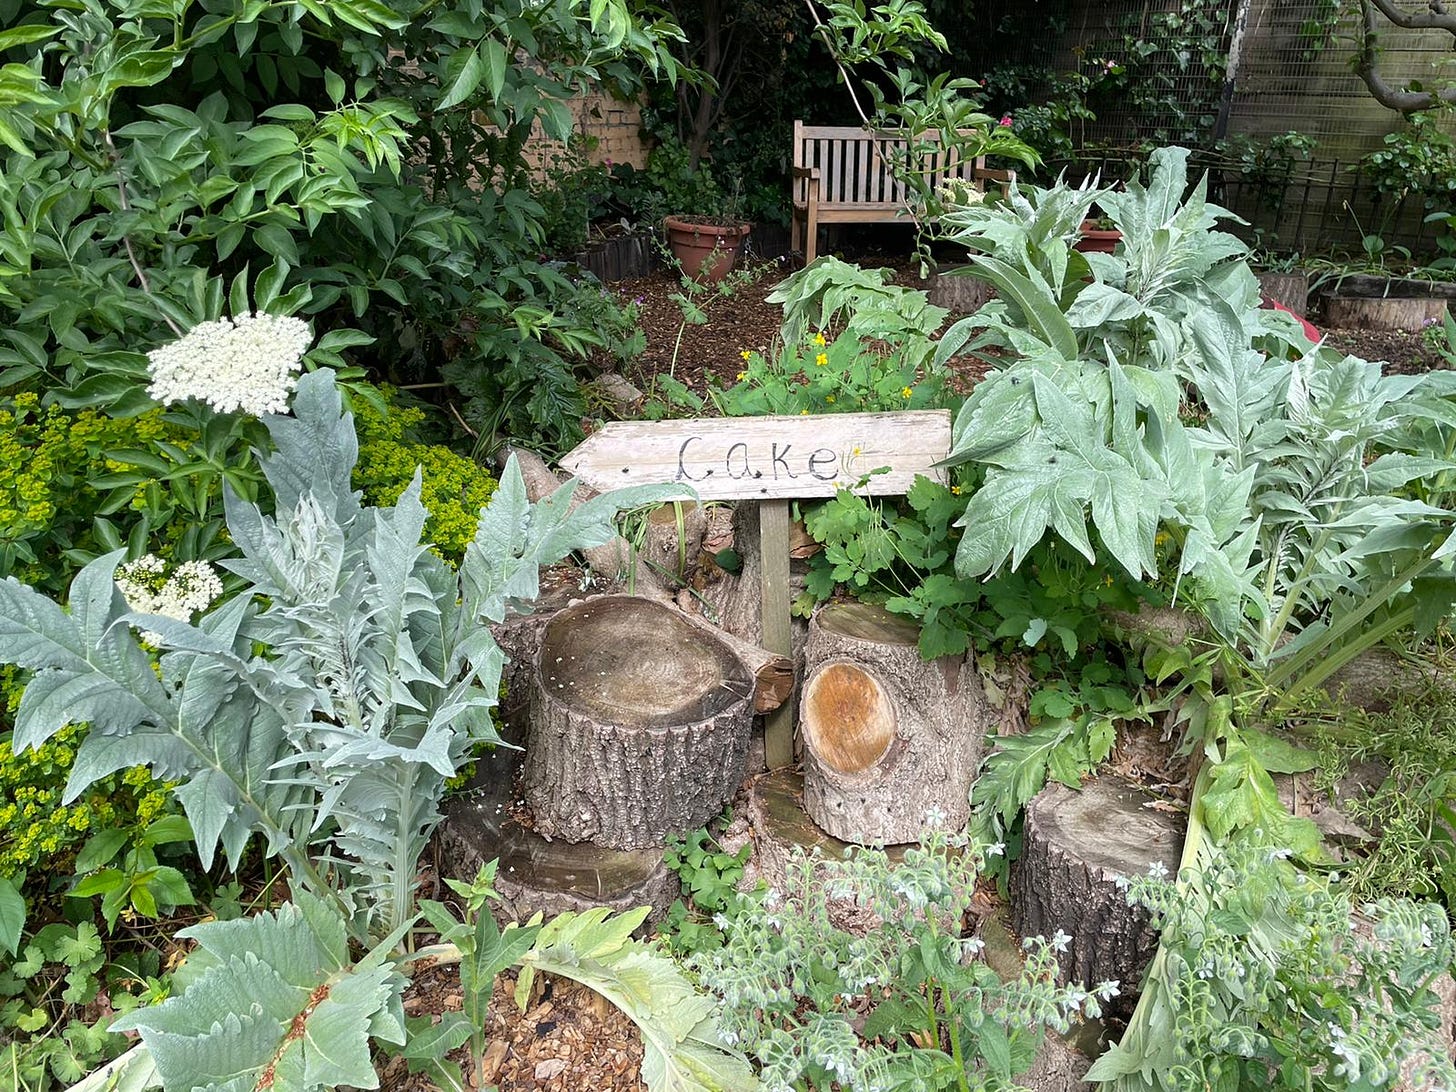 Colour photo of an outdoor area with plants, logs, a wooden bench and a wooden sign that reads 'cake'